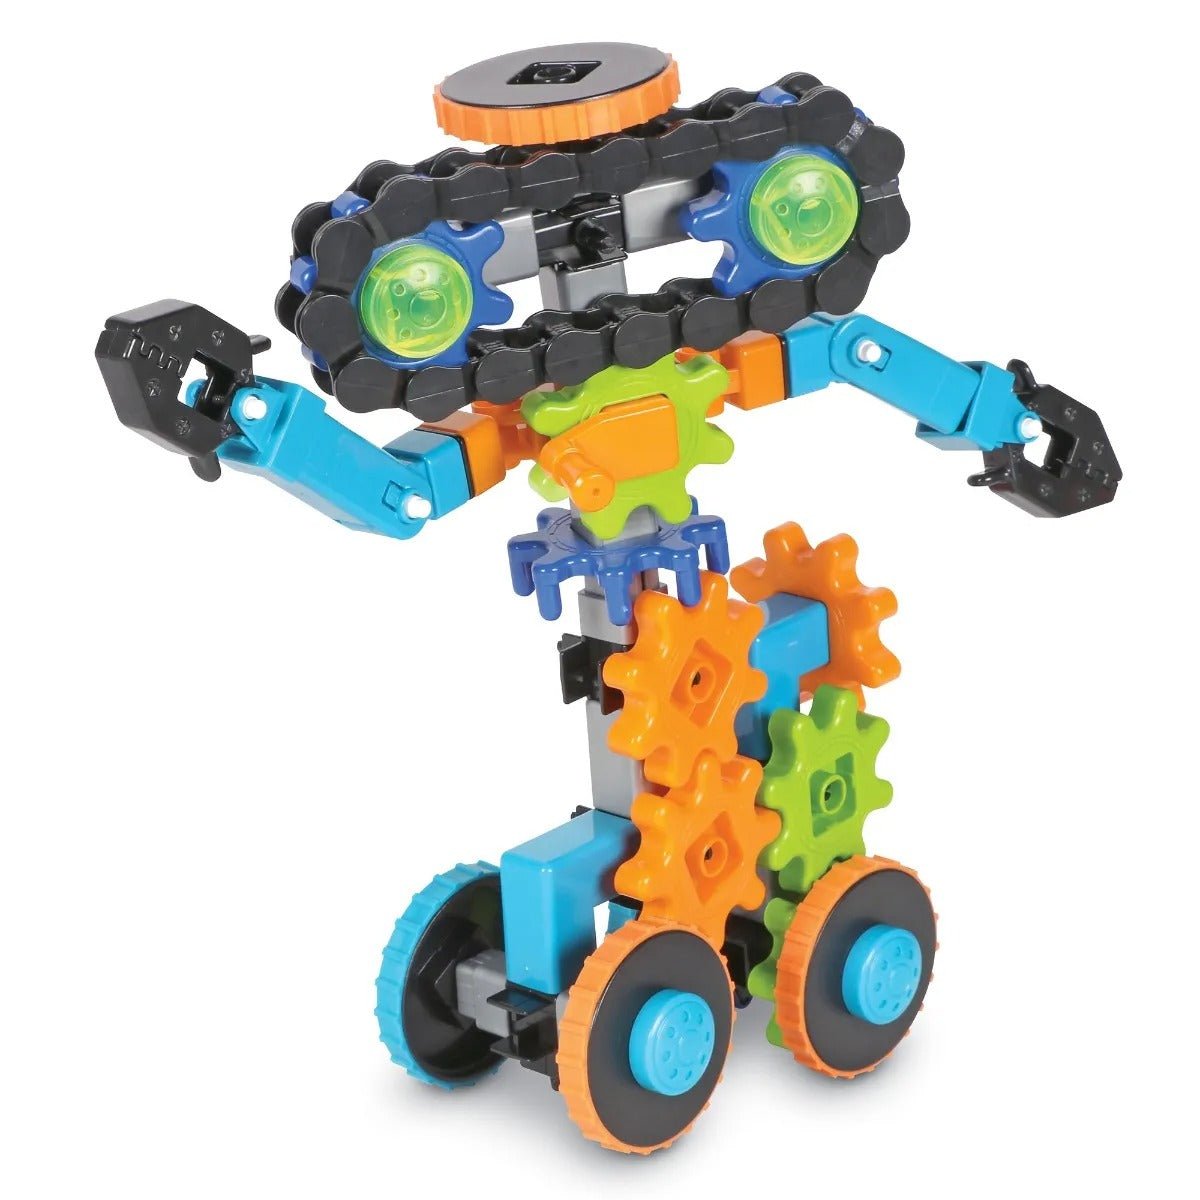 Gears Gears Gears Robots In Motion, Use the Gears! Gears! Gears Robots In Motion to design and build your own twisting, turning, moving robot toy with Gears! Gears! Gears!®. The Gears! Gears! Gears Robots In Motion come supplied with 116 pieces, this construction set includes components for children to design and build robots, cars and machines that move and transform. Follow along with the included STEM Activity Guide or build your own unique robo-toy with rolling treads, spinning eyes and more. There will